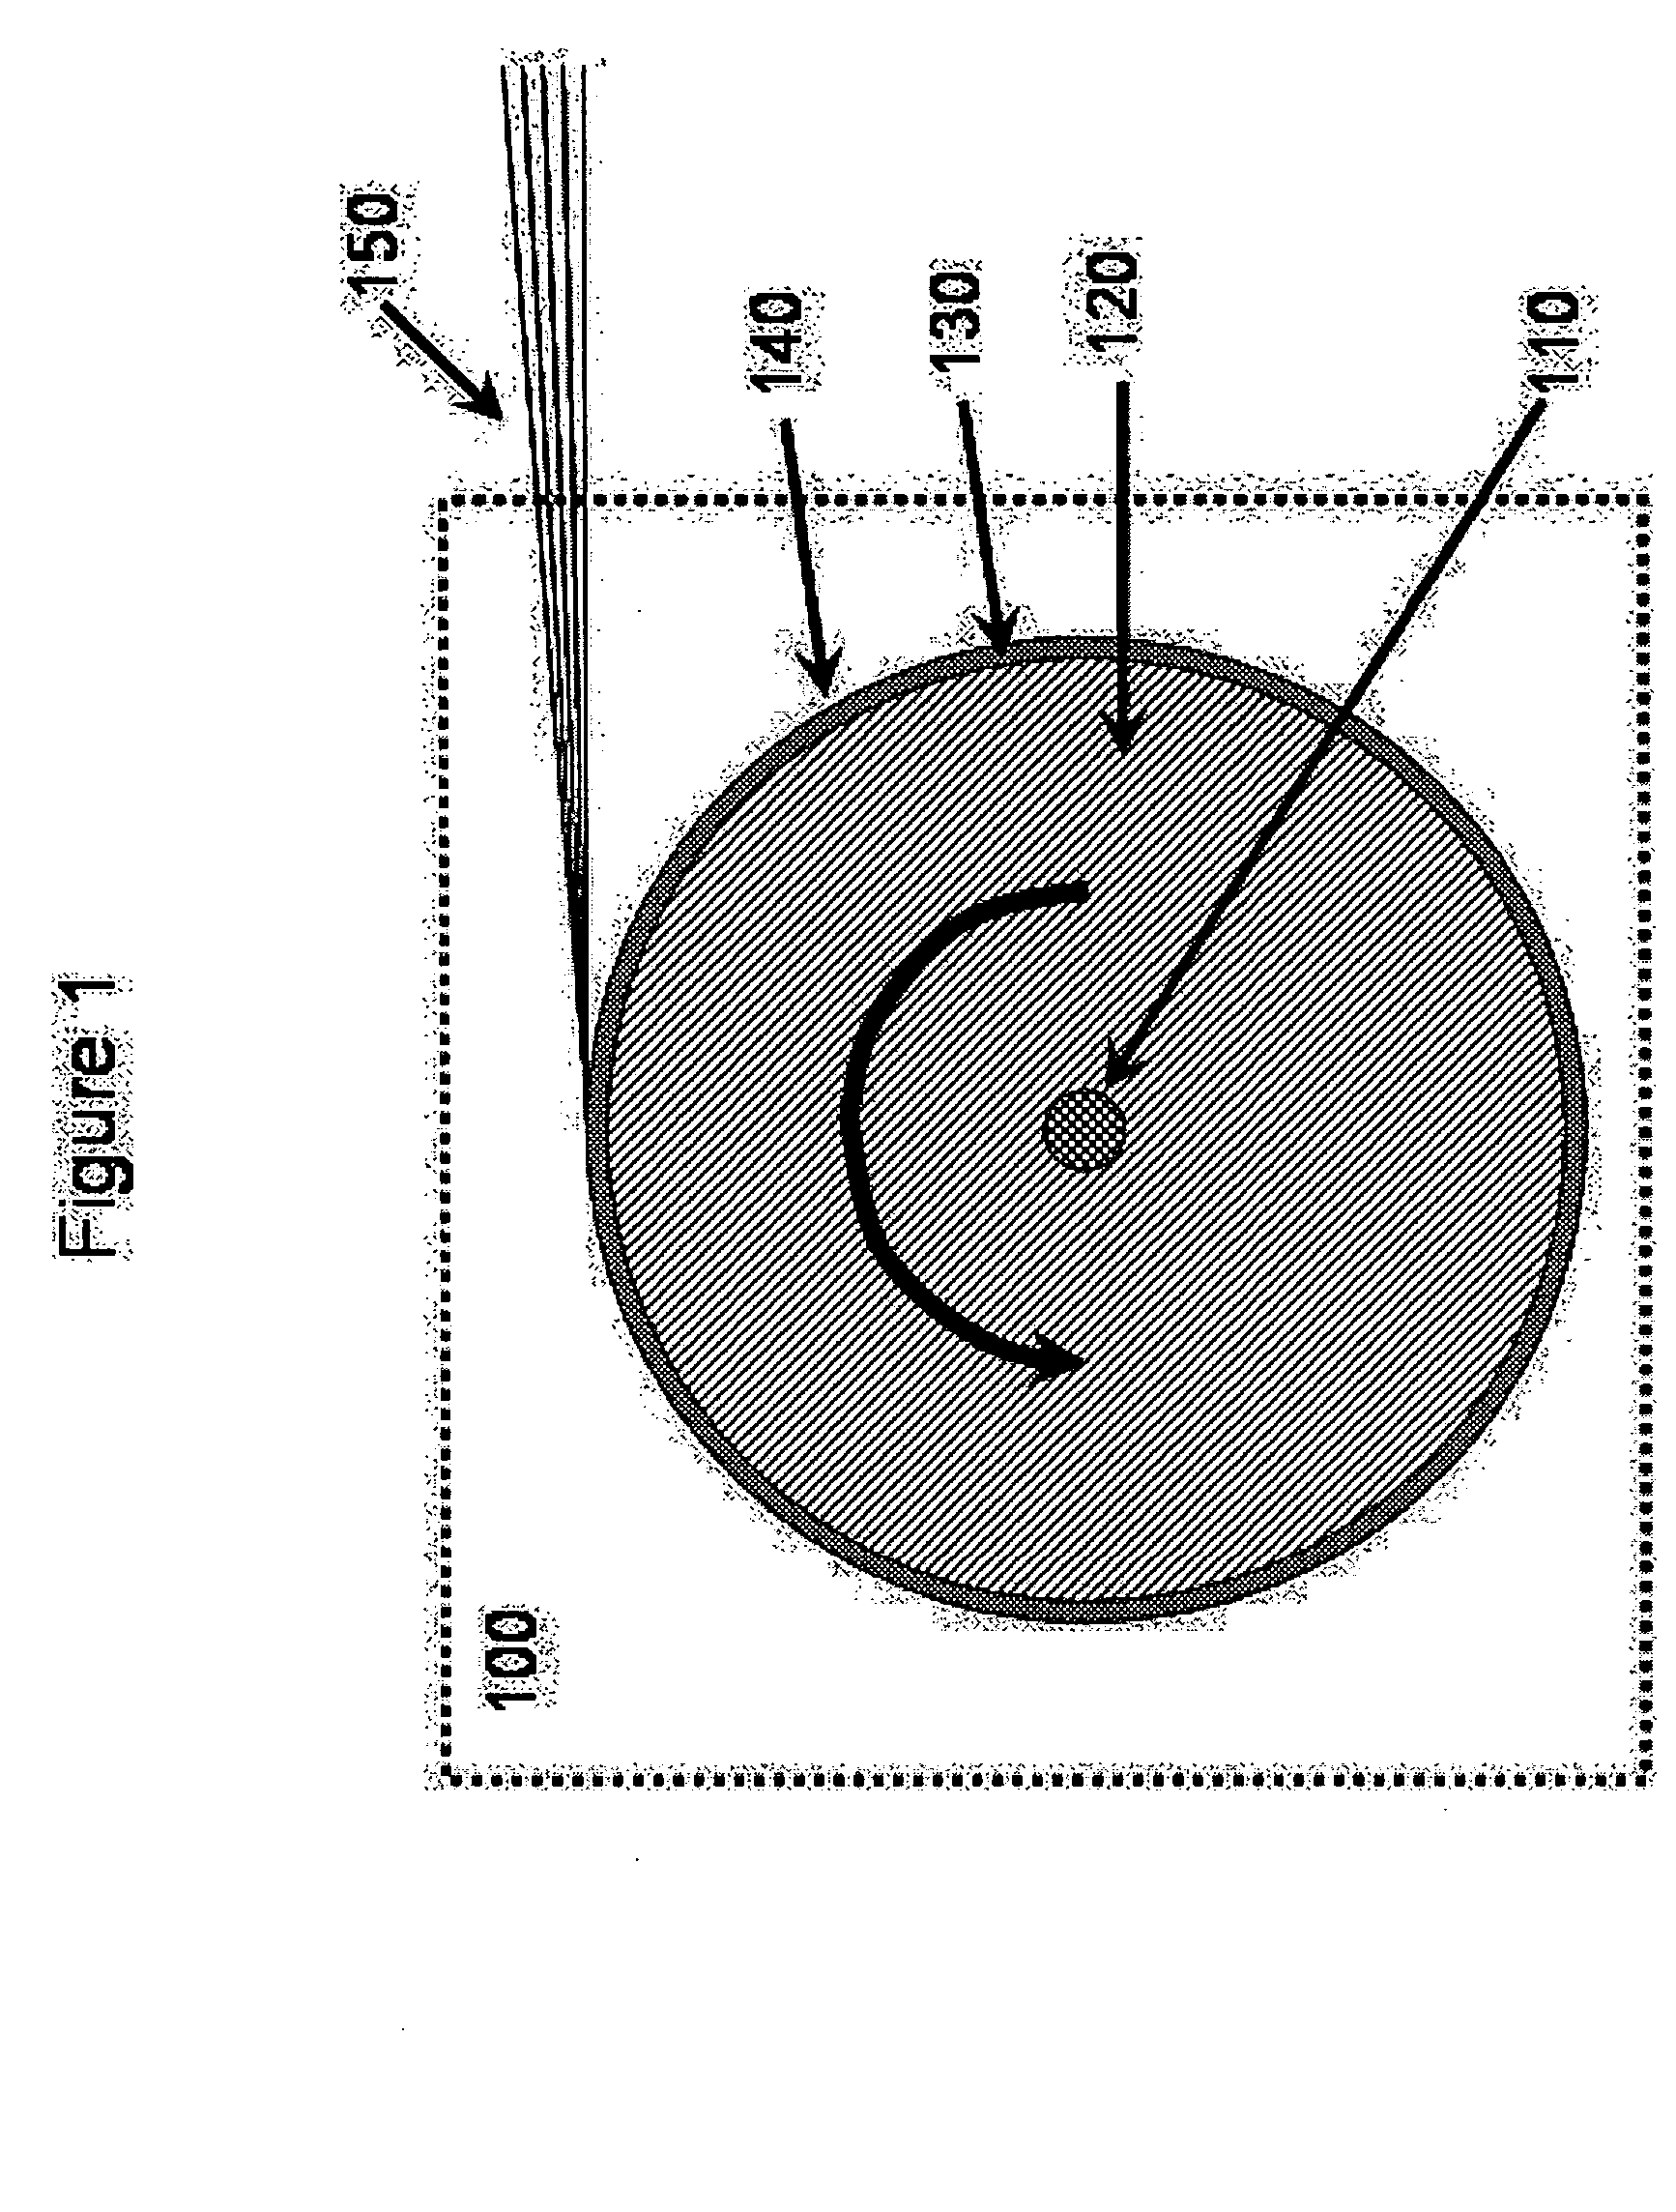 Carbon foam composite tooling and methods for using the same